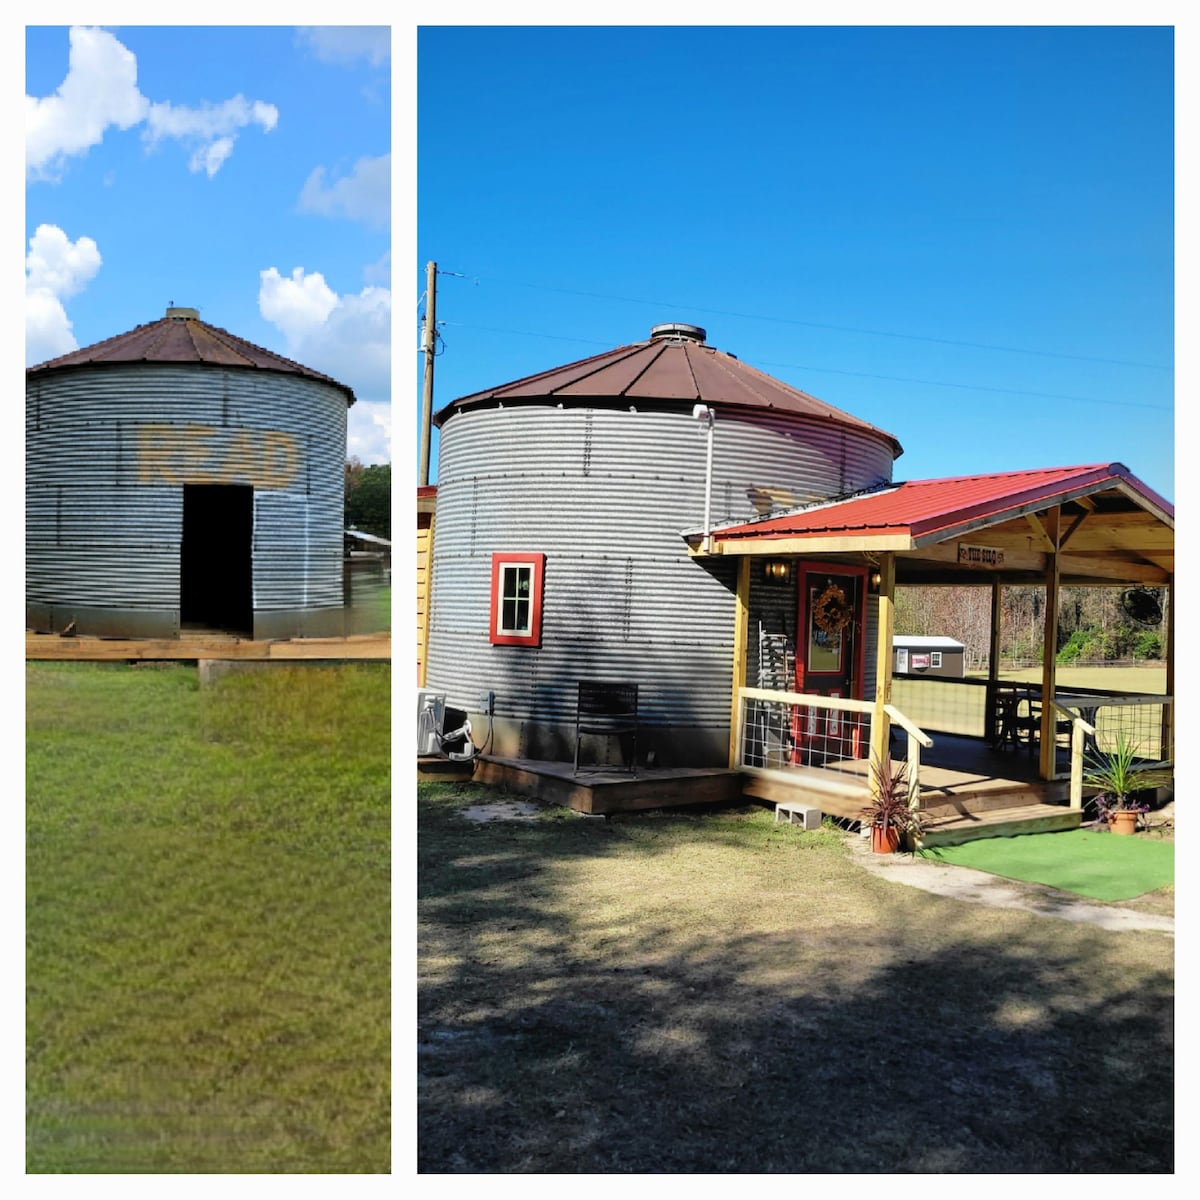 The Silo: Feed the horses from your porch